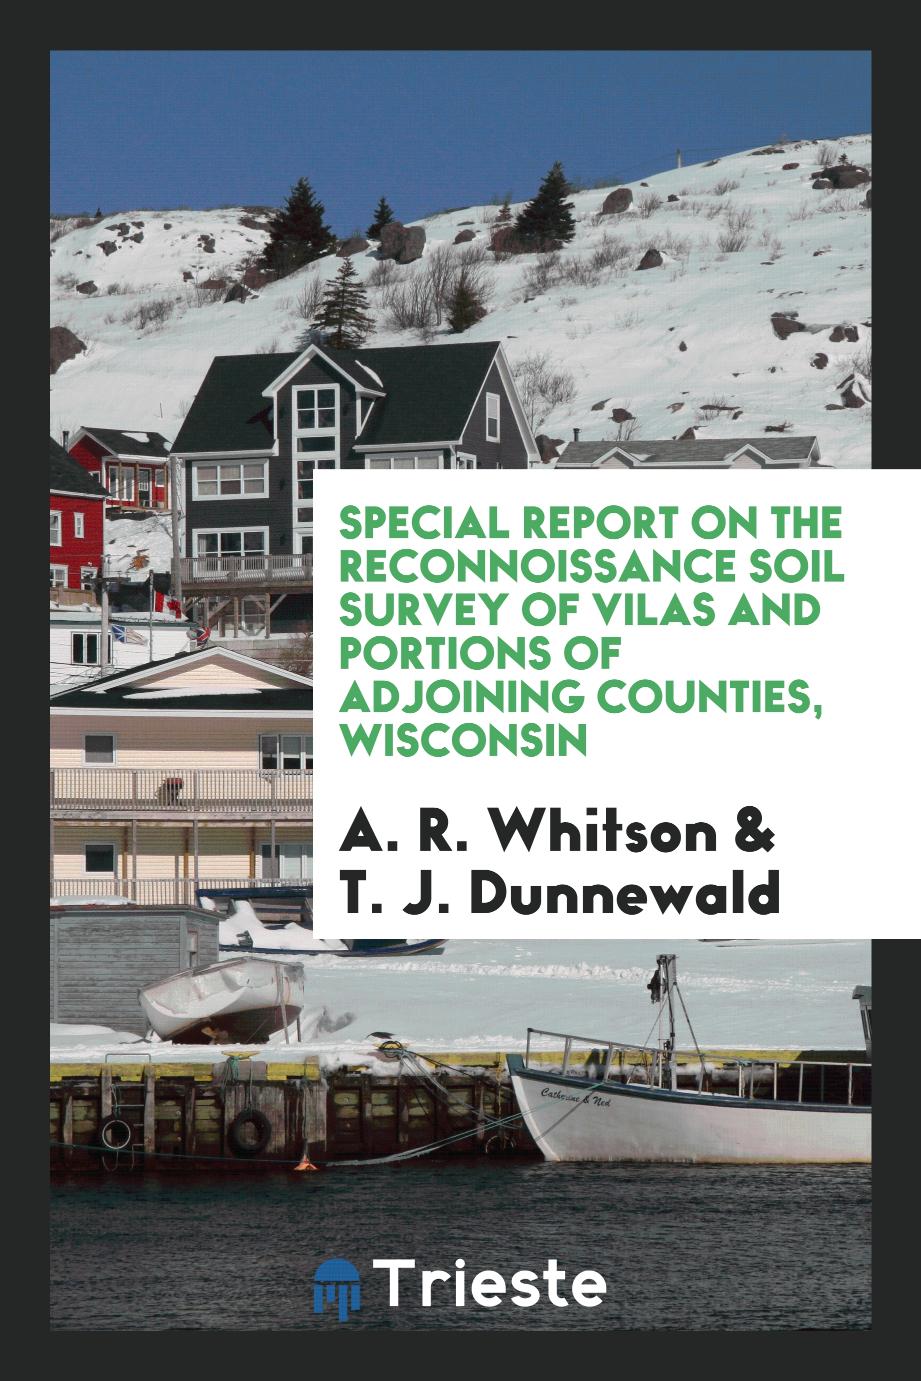 Special Report on the Reconnoissance Soil Survey of Vilas and Portions of Adjoining Counties, Wisconsin